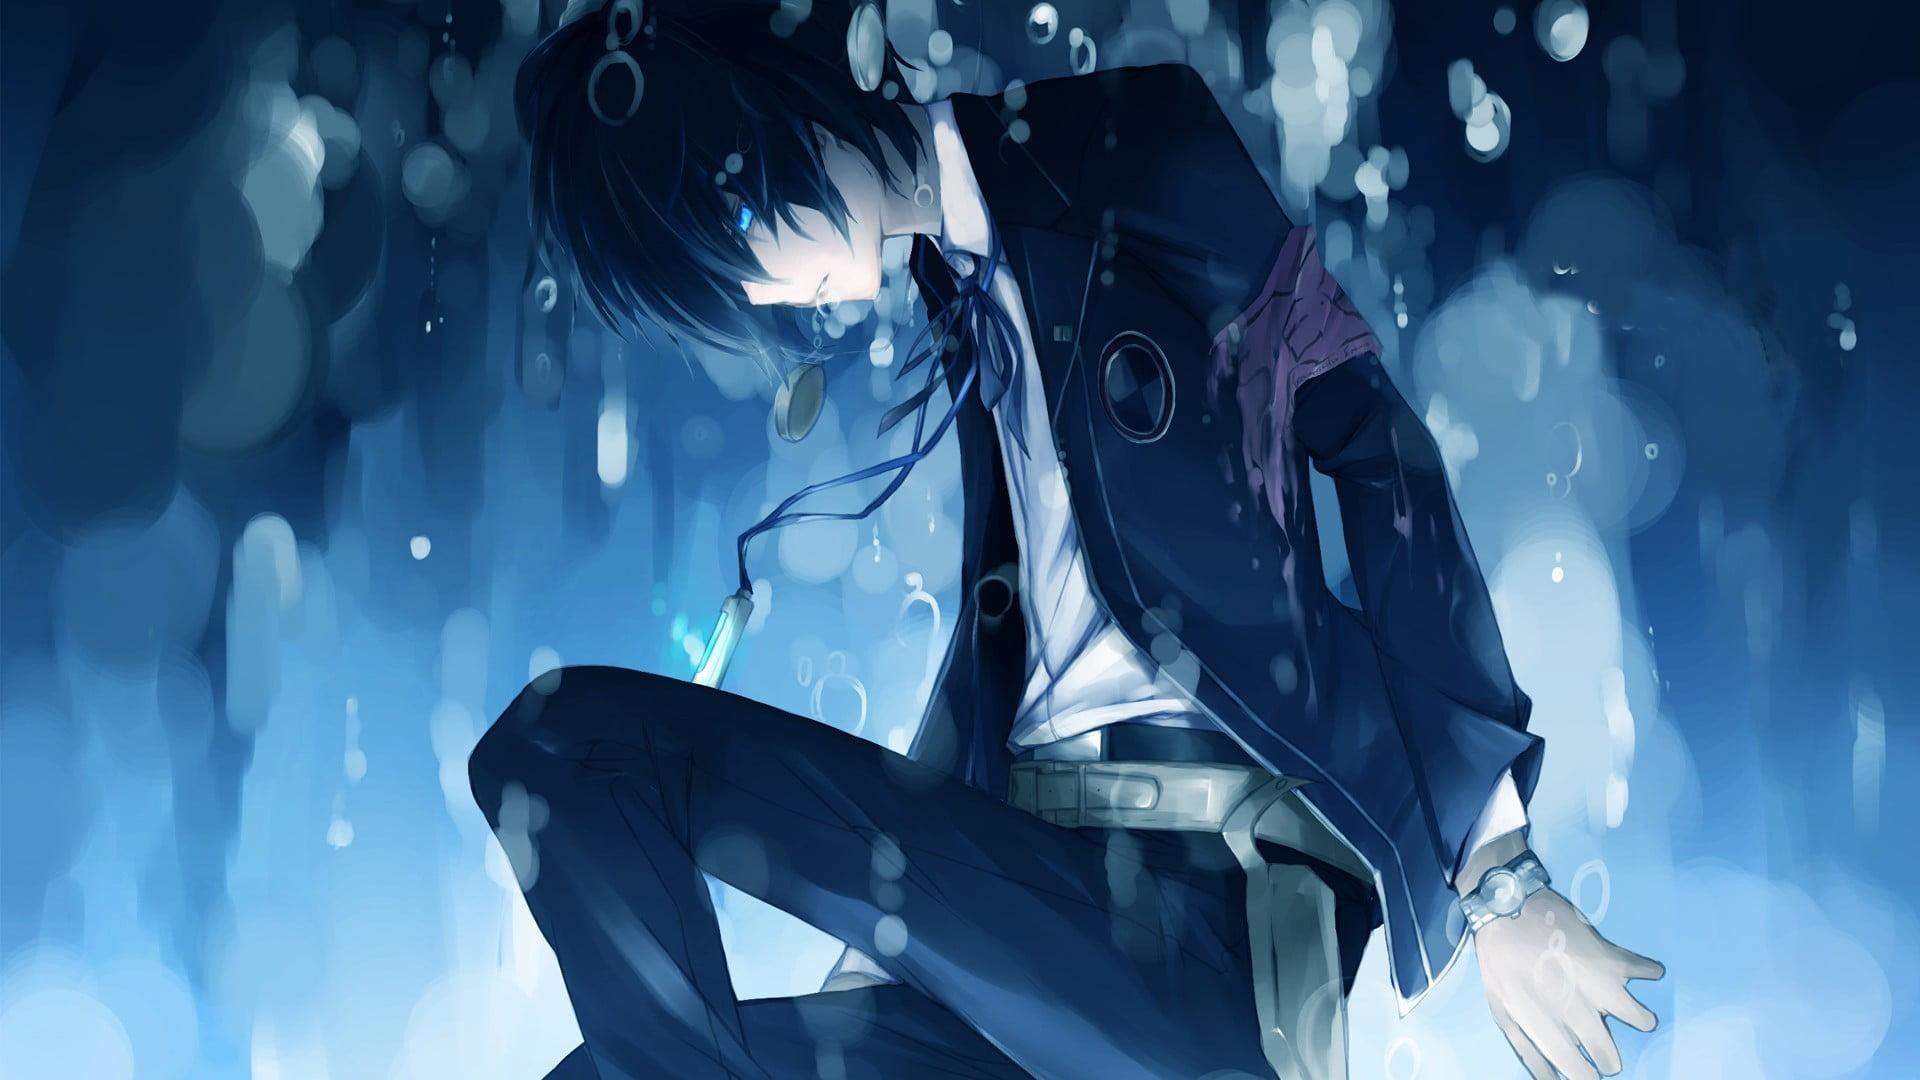 Anime Black Haired Guy Wallpapers - Wallpaper Cave